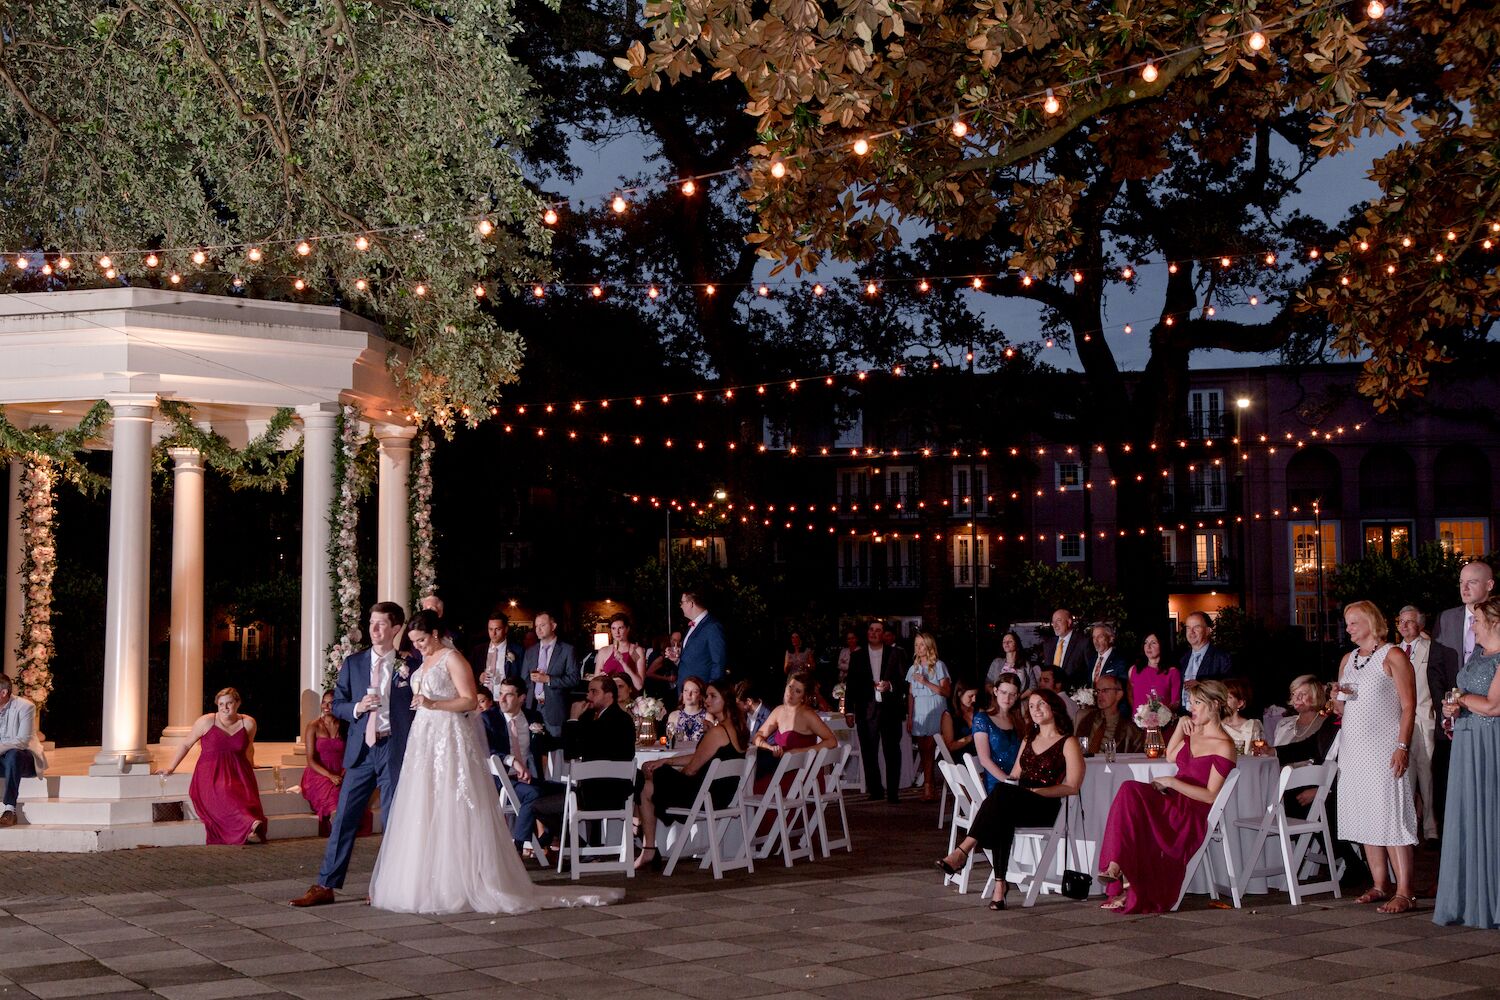 Bride and groom and wedding guests in courtyard